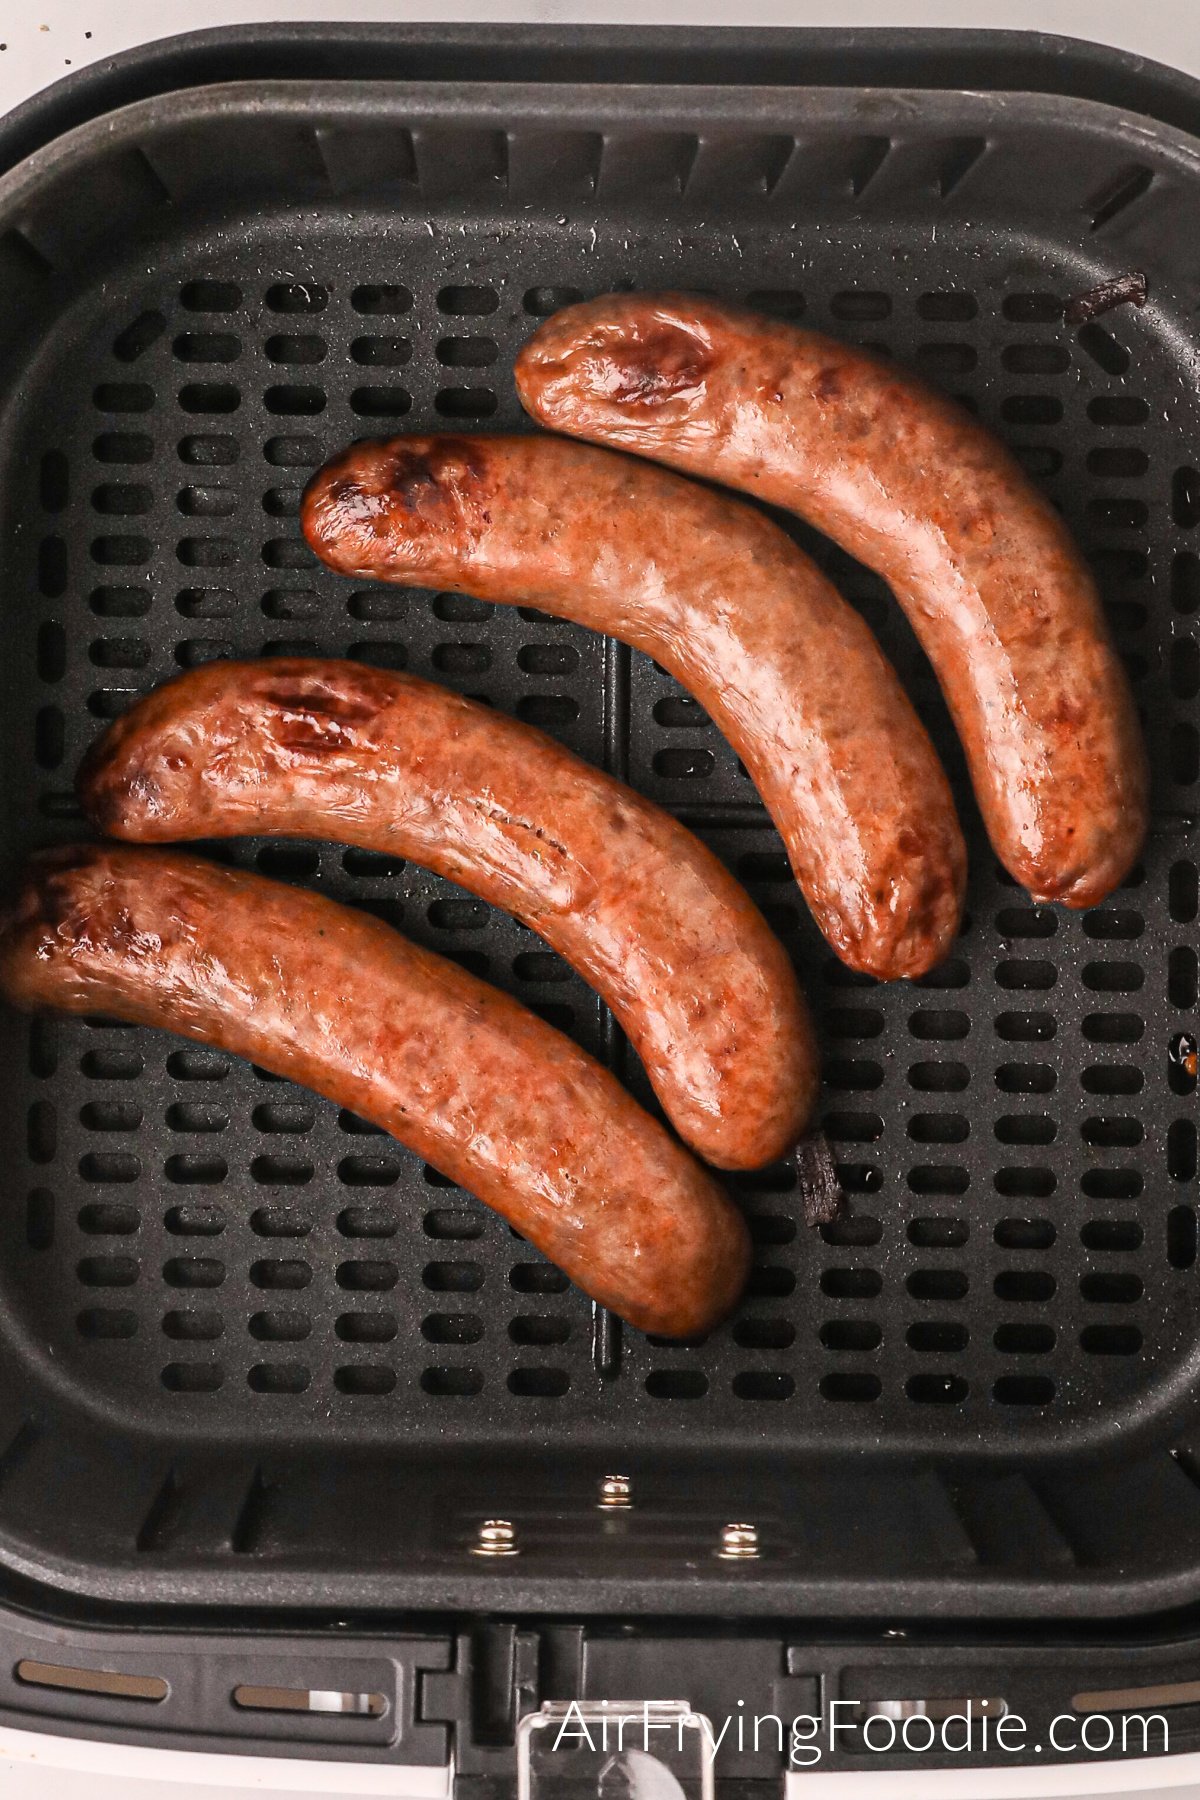 Fully cooked Italian sausages in the basket of the air fryer.